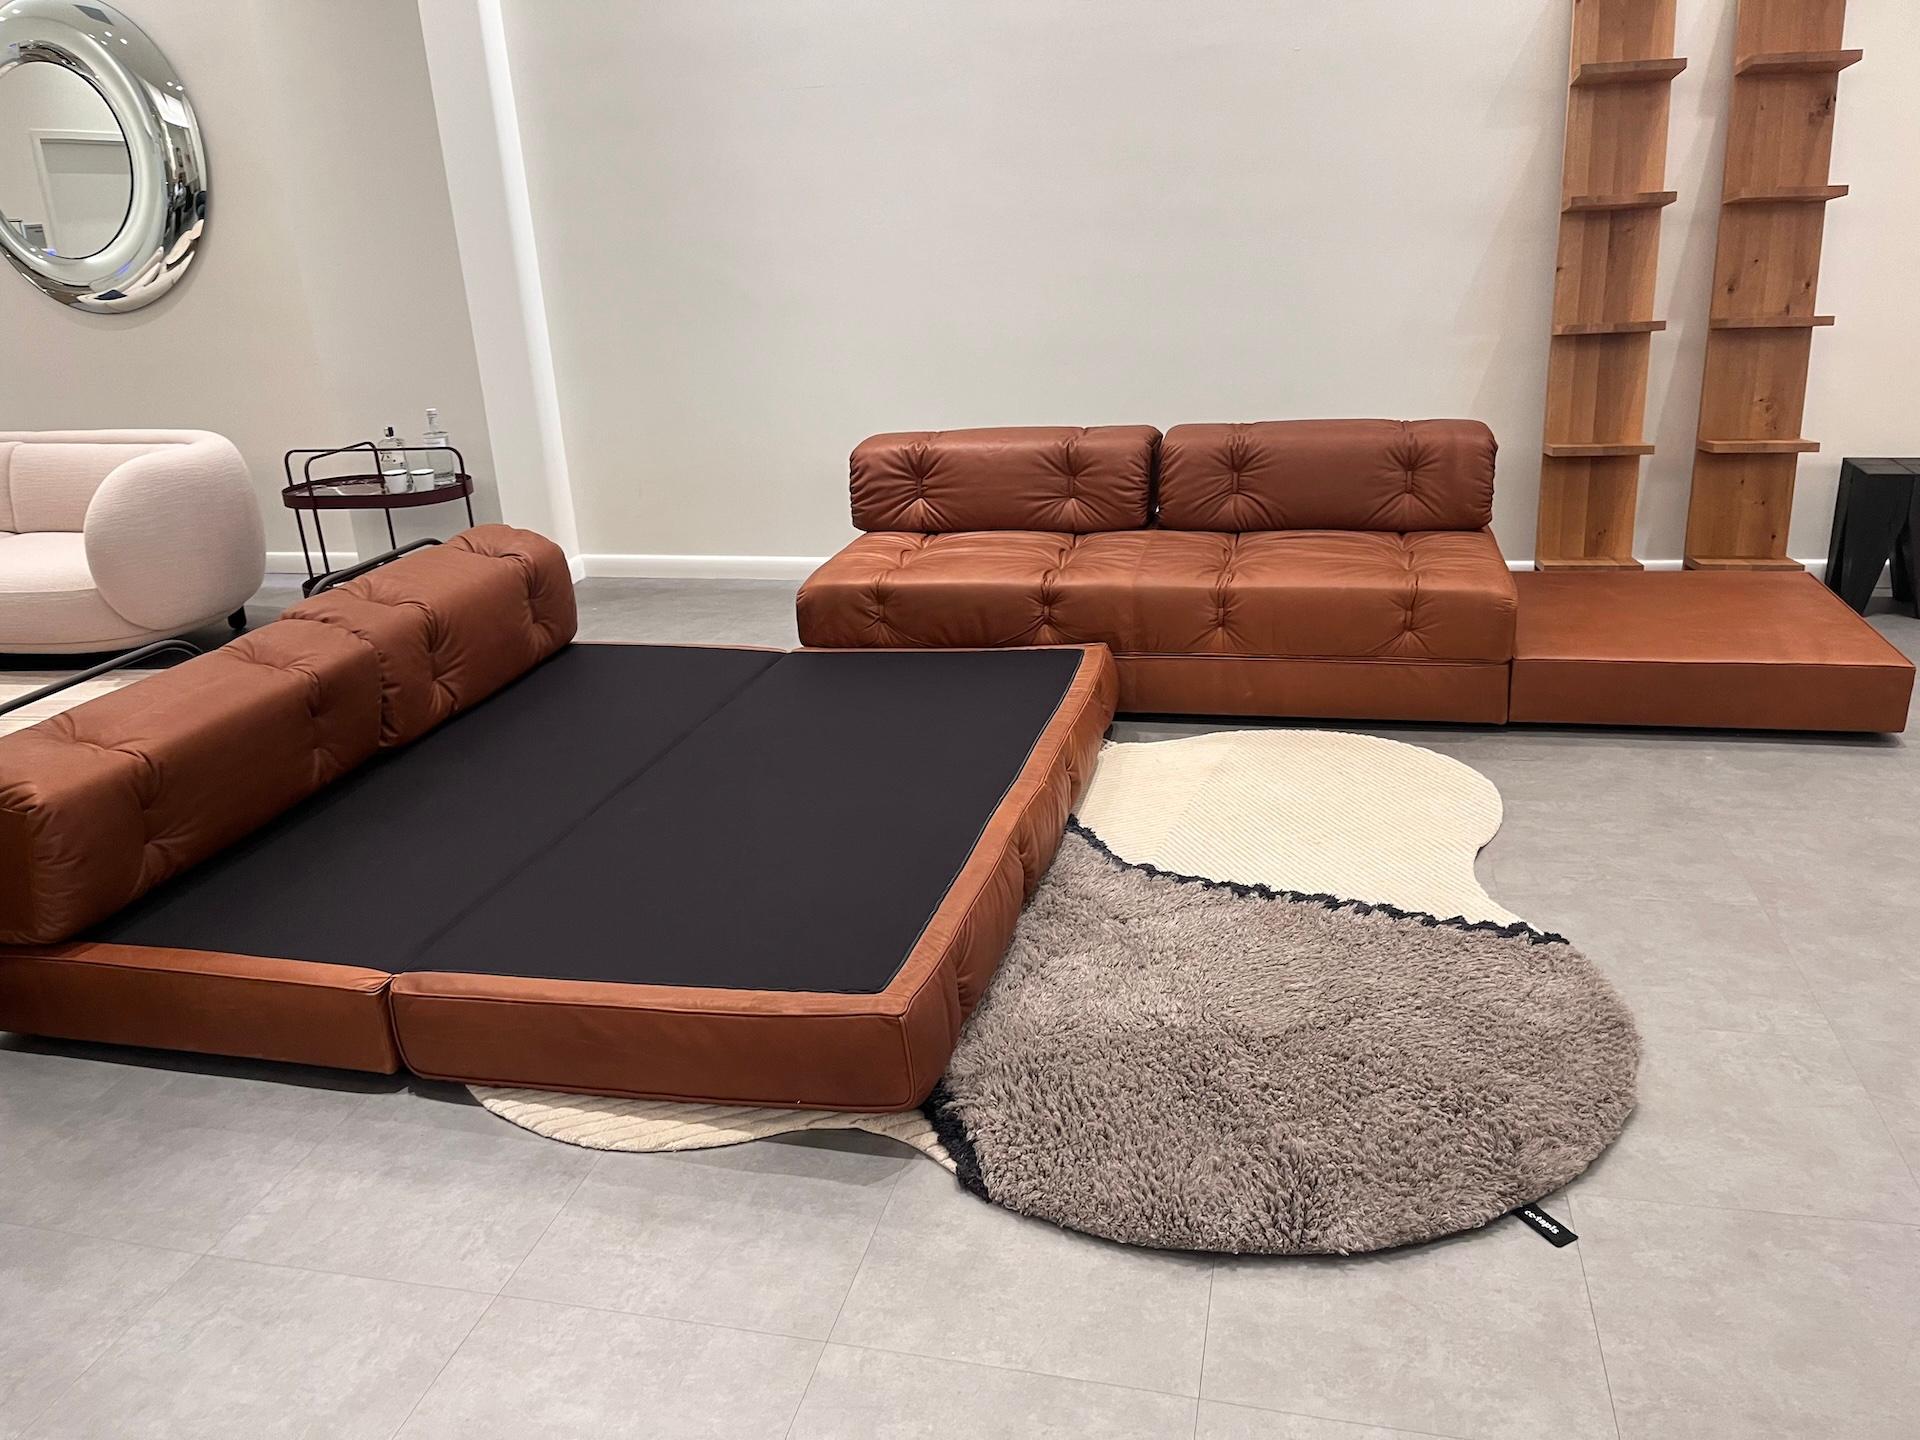 Wittmann Leather Atrium Sofa Bed with Tray Element by Wittmann Workshop in STOCK 5